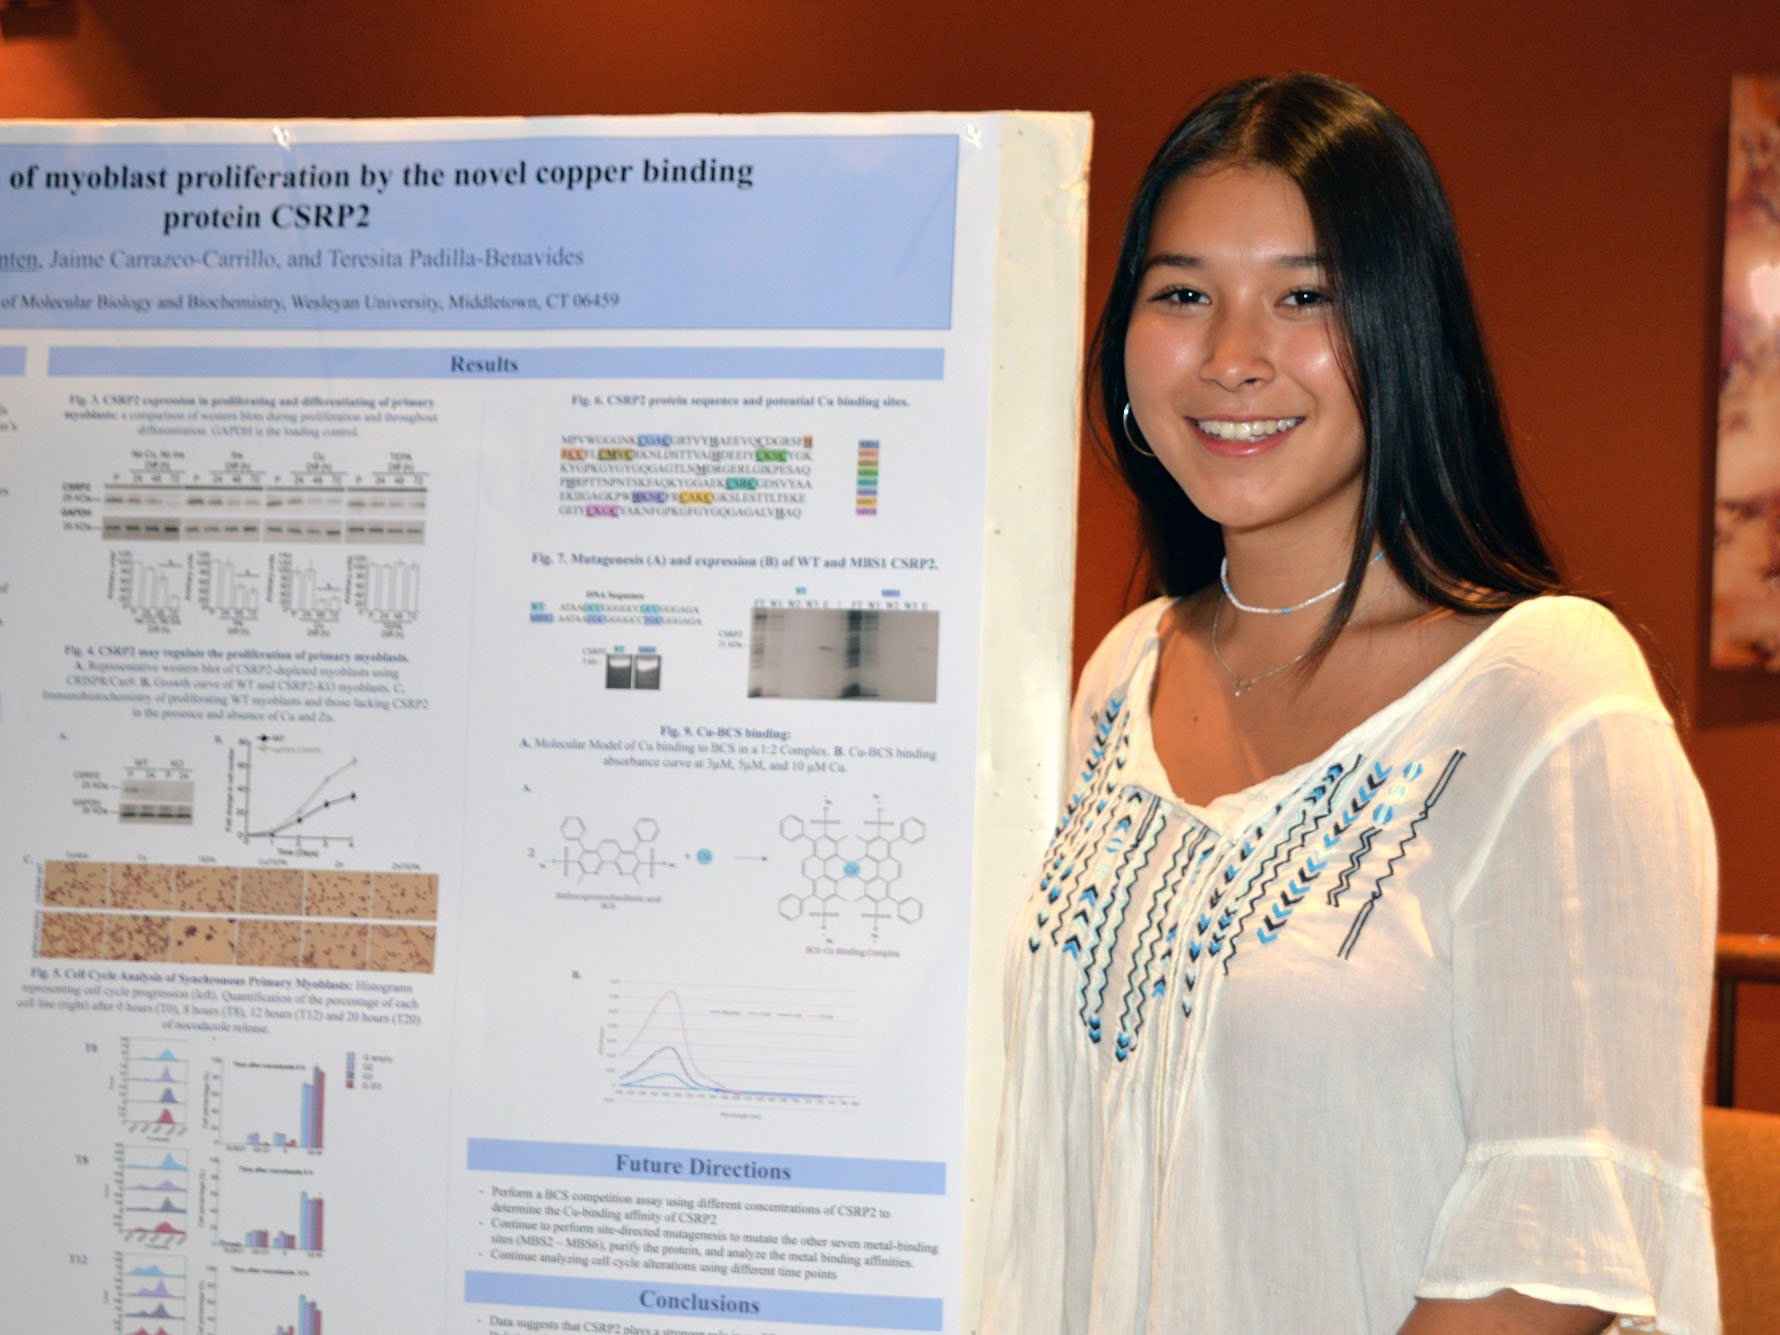 Budding Scientists Share Their Research at Summer Poster Session